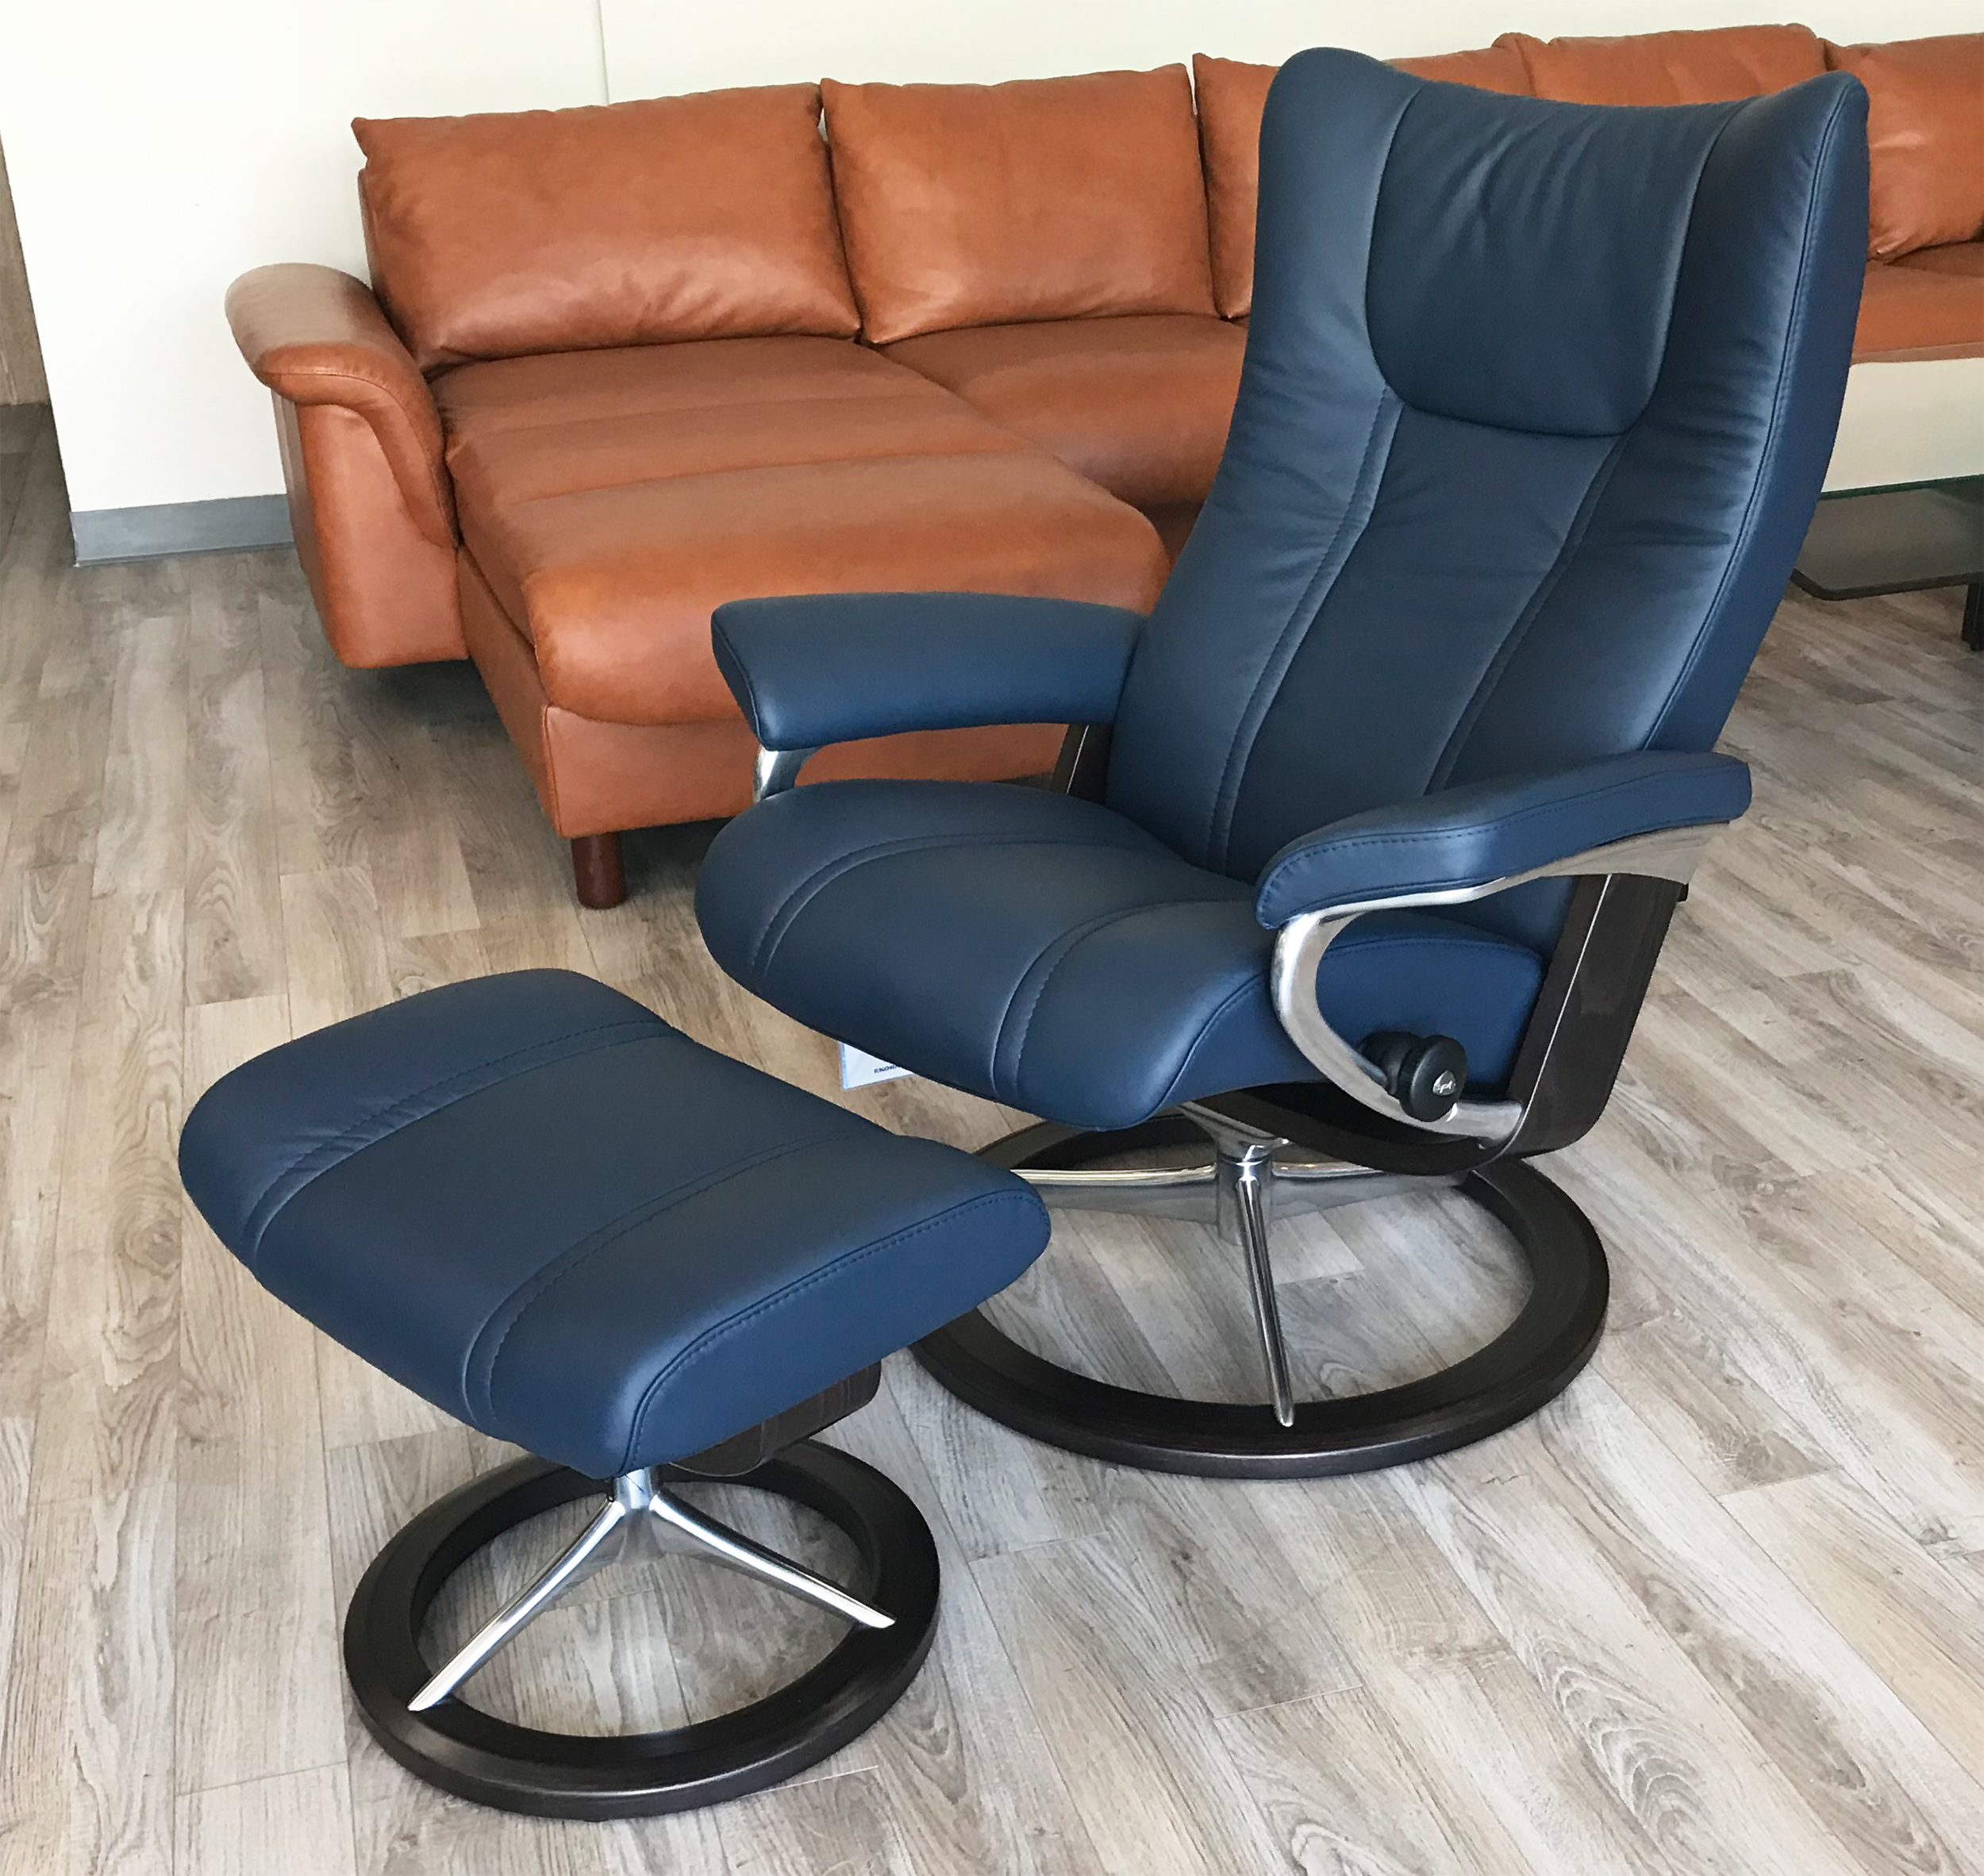 Stressless Wing Signature Base Paloma Oxford Blue Leather Recliner Chair and Ottoman by Ekornes